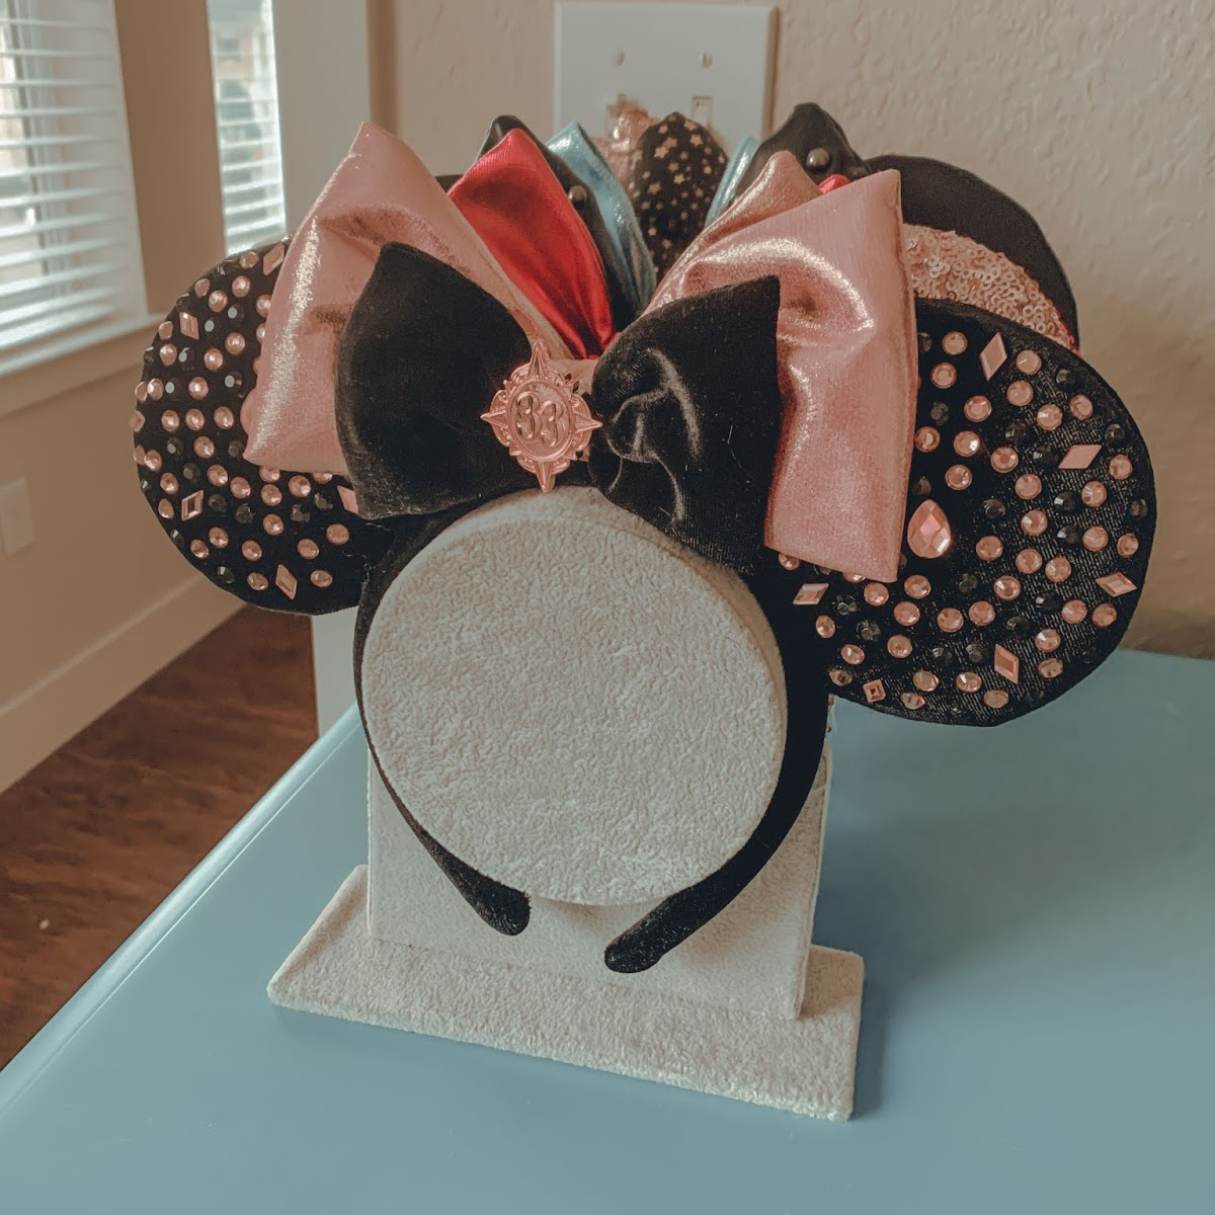 How To Store Mickey Ears